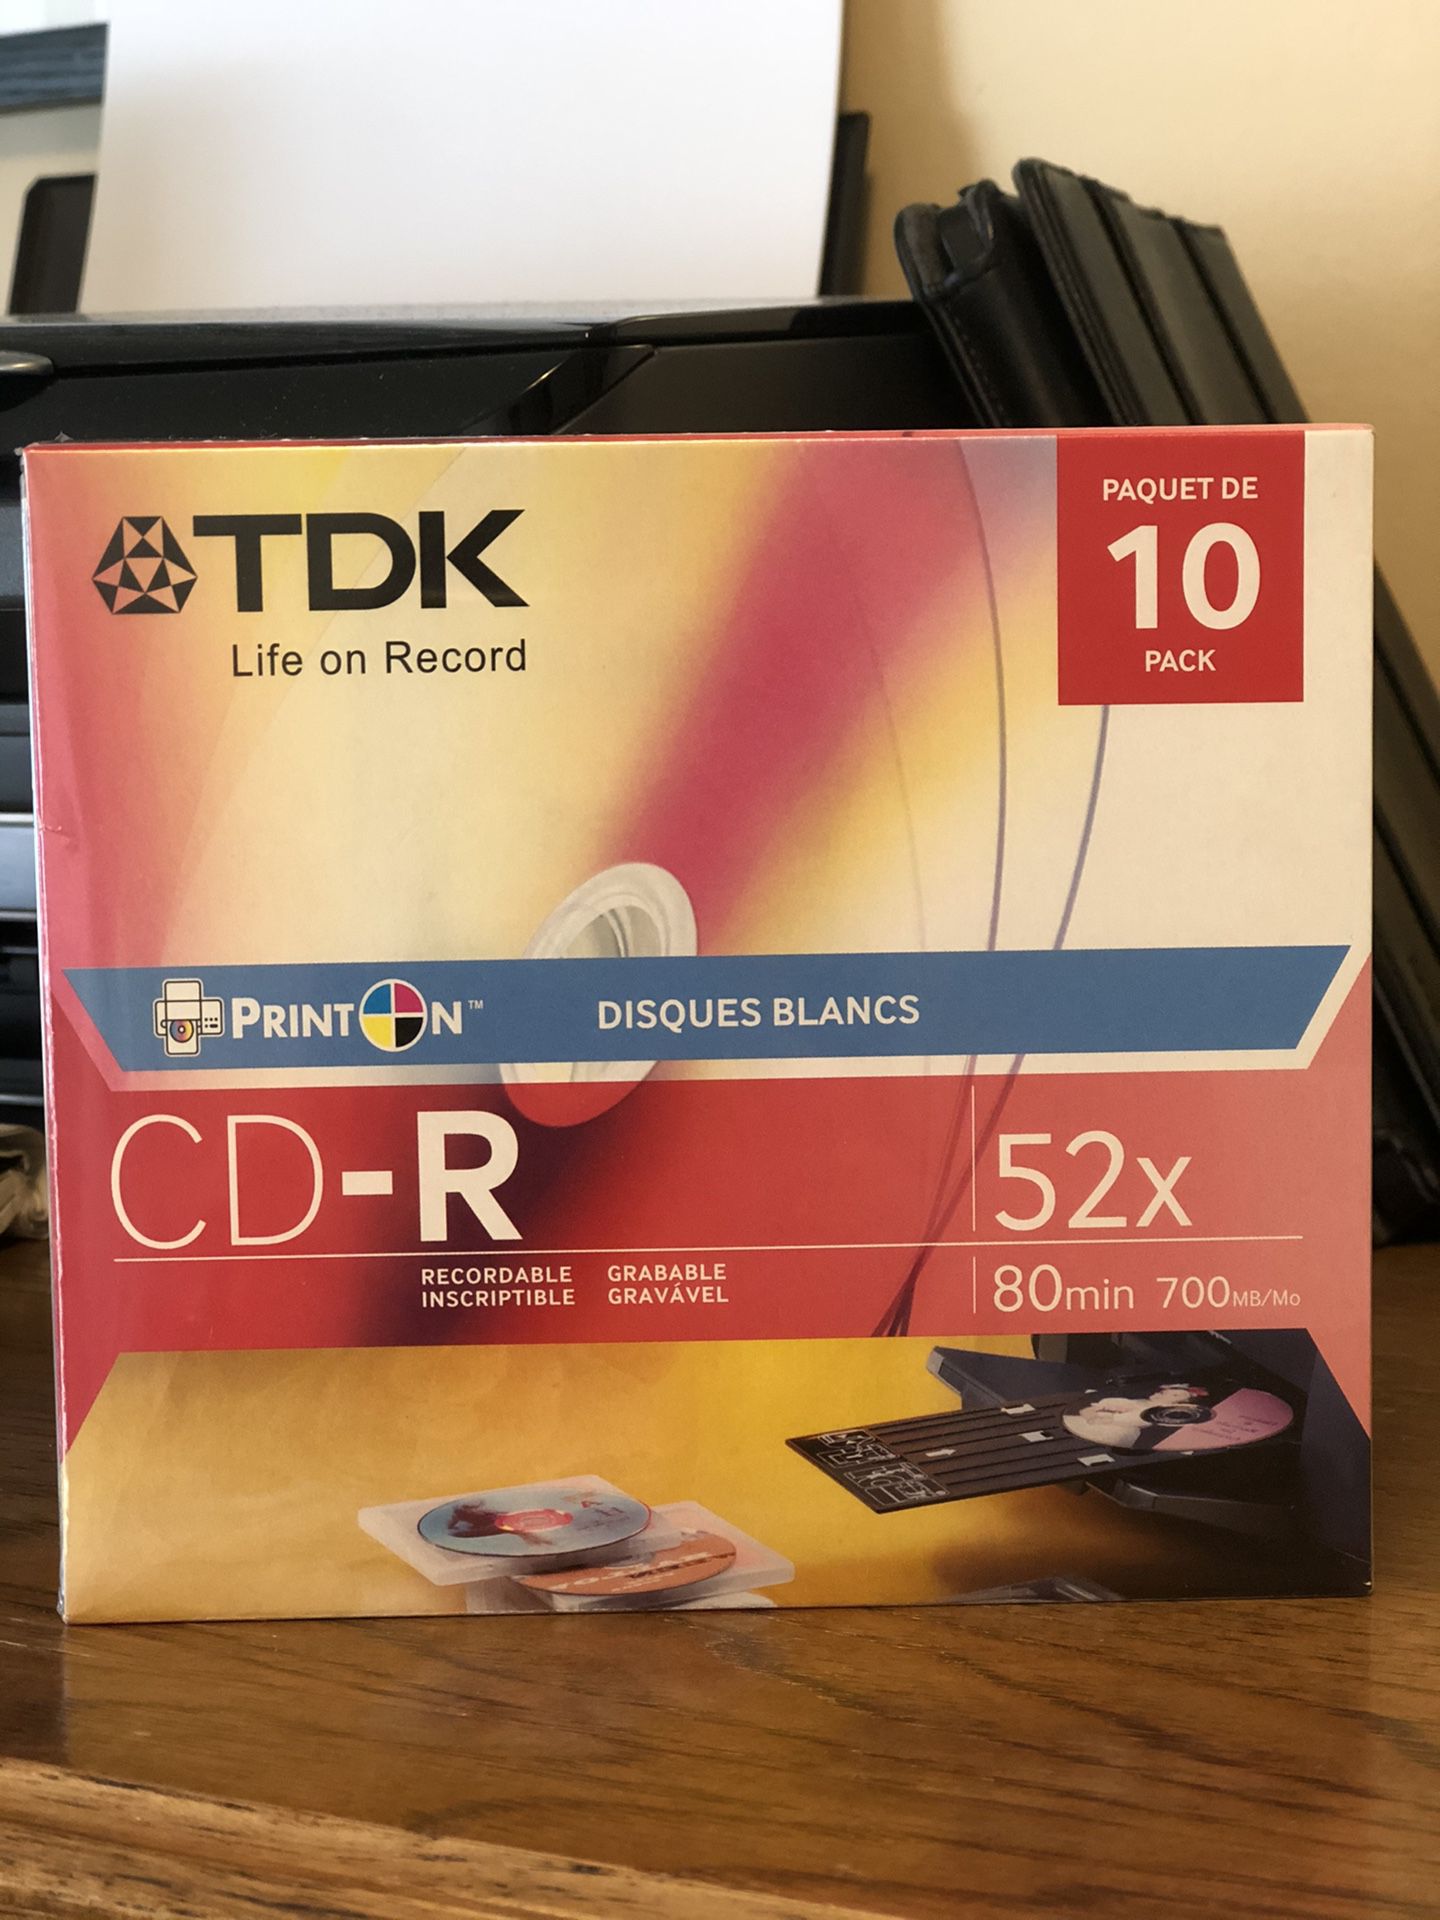 CD-R pack of 10 never opened